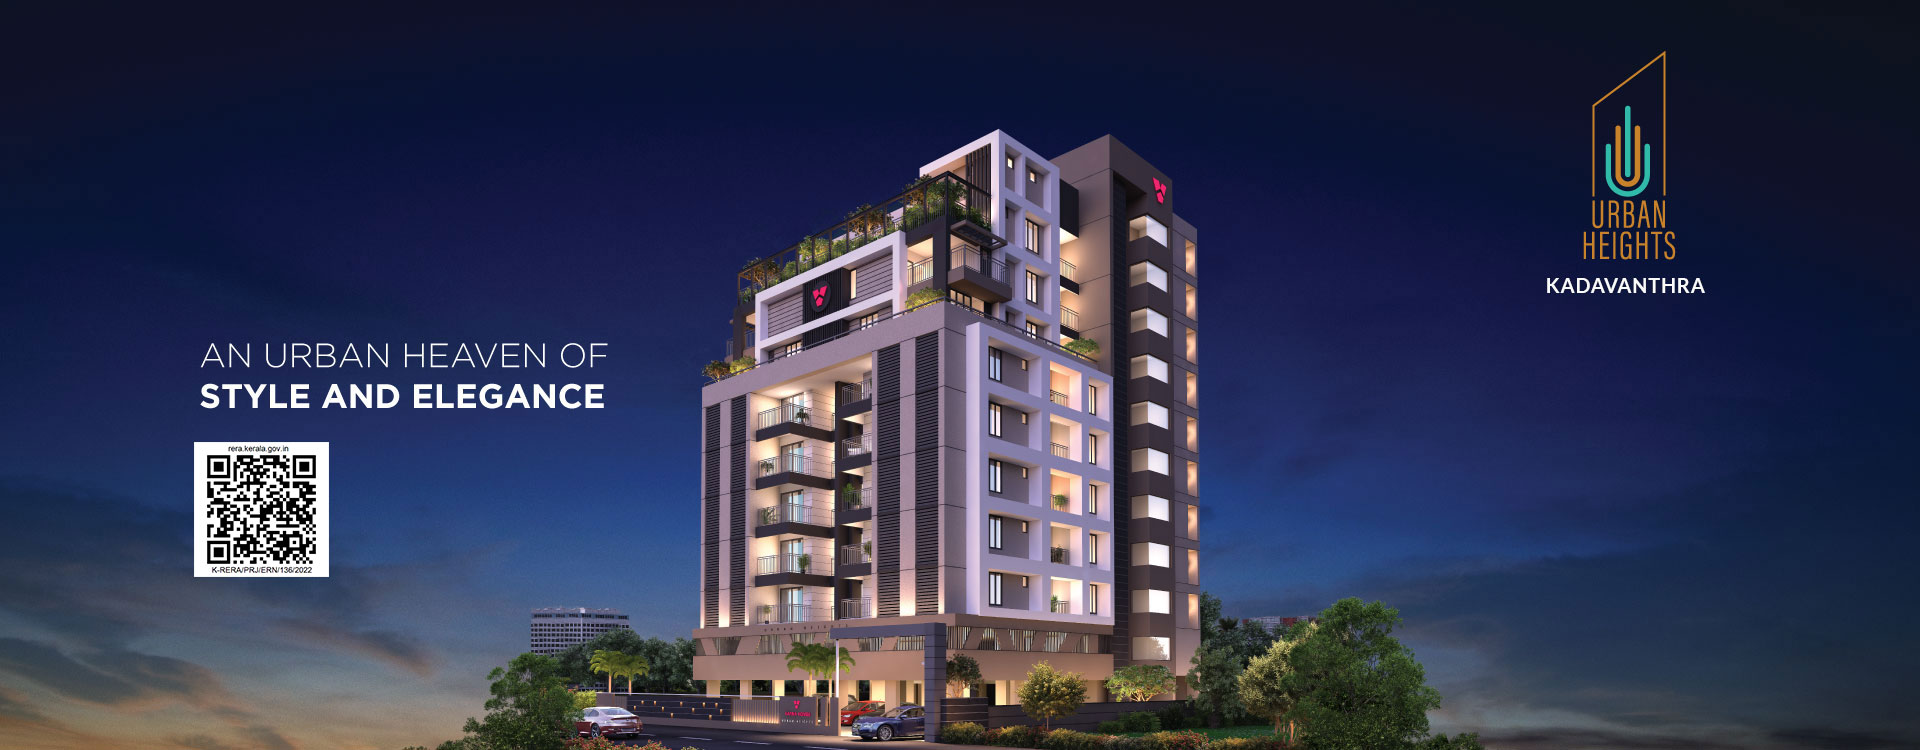 luxury apartments in cochin